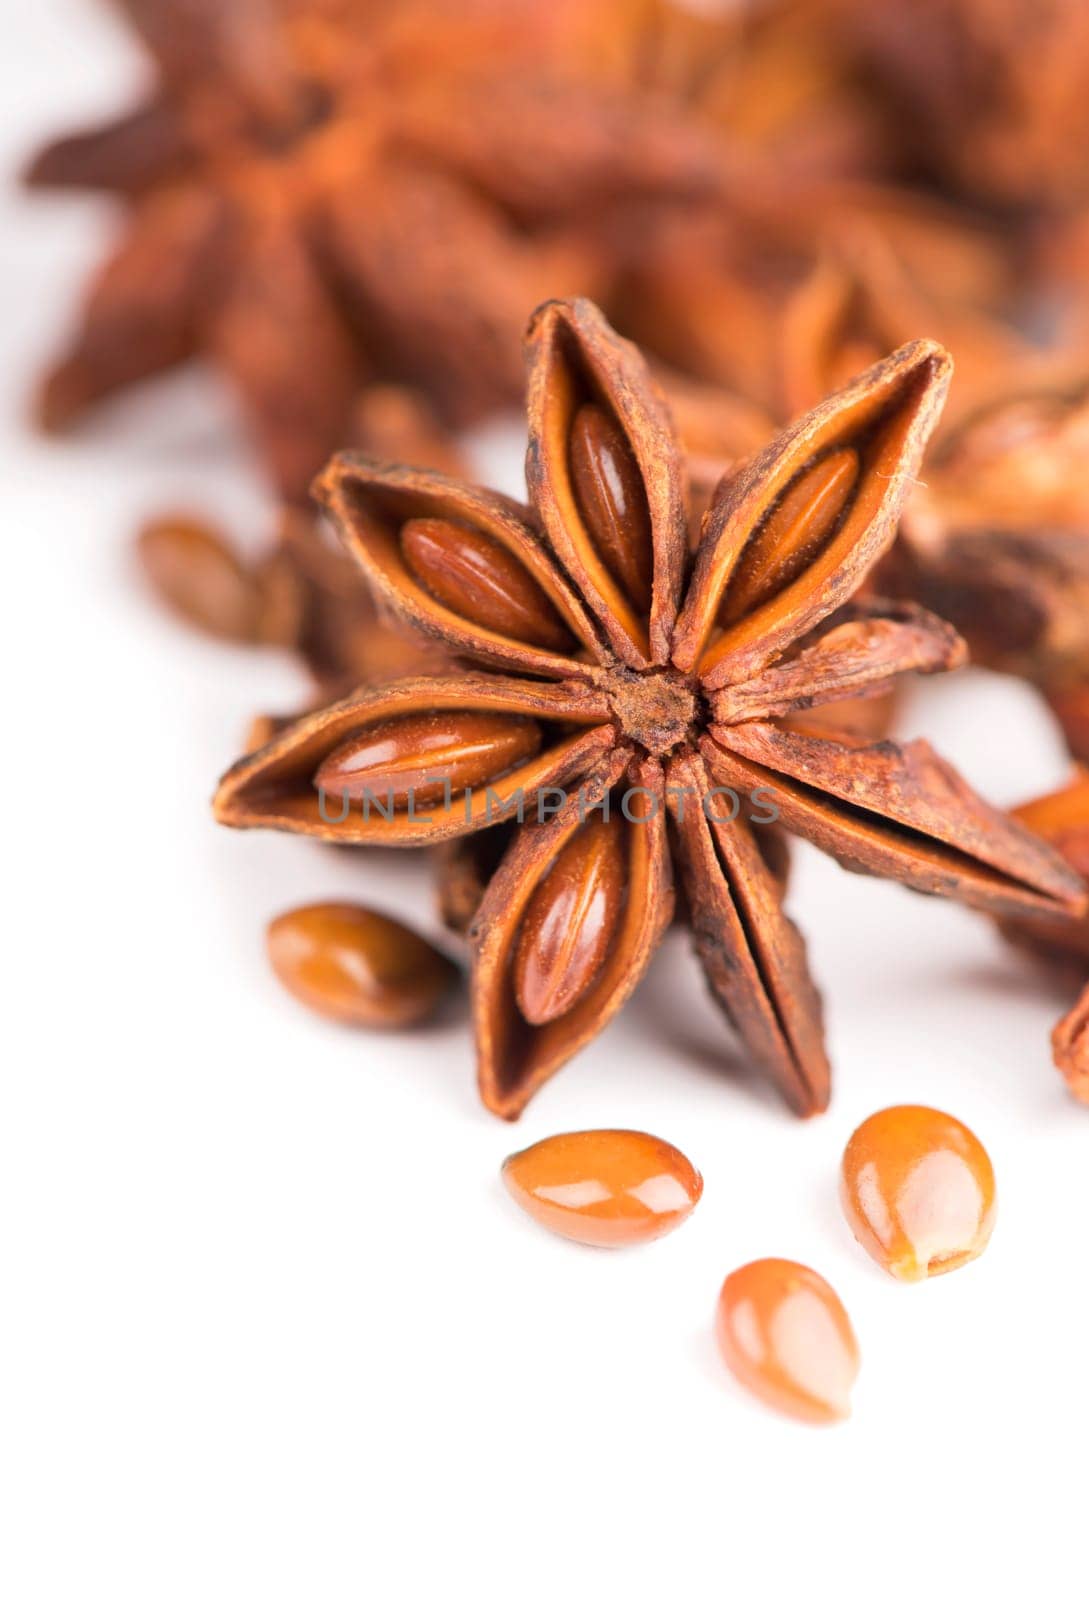 anisetree anise. Spices and dry herbs. Whole Star Anise isolated on white background by aprilphoto